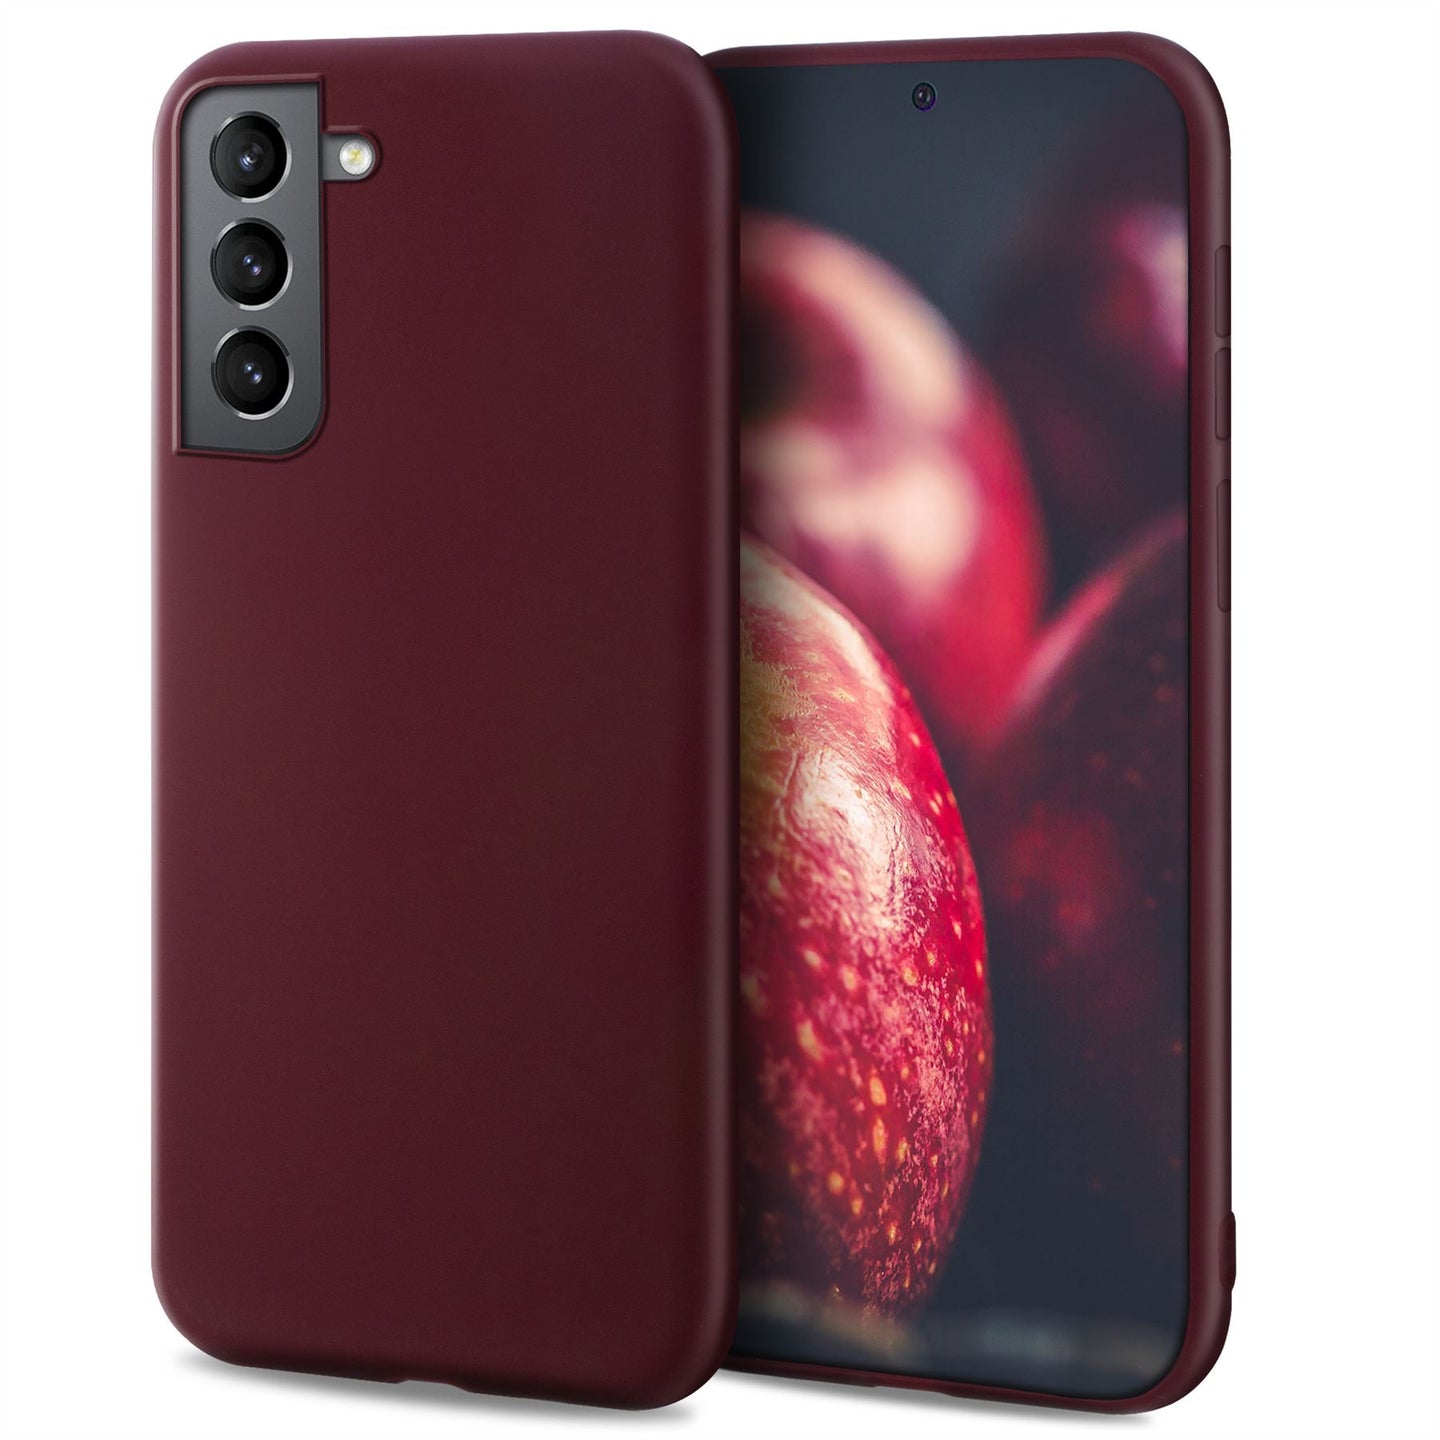 Moozy Minimalist Series Silicone Case for Samsung S21, Samsung S21 5G, Wine Red - Matte Finish Slim Soft TPU Cover